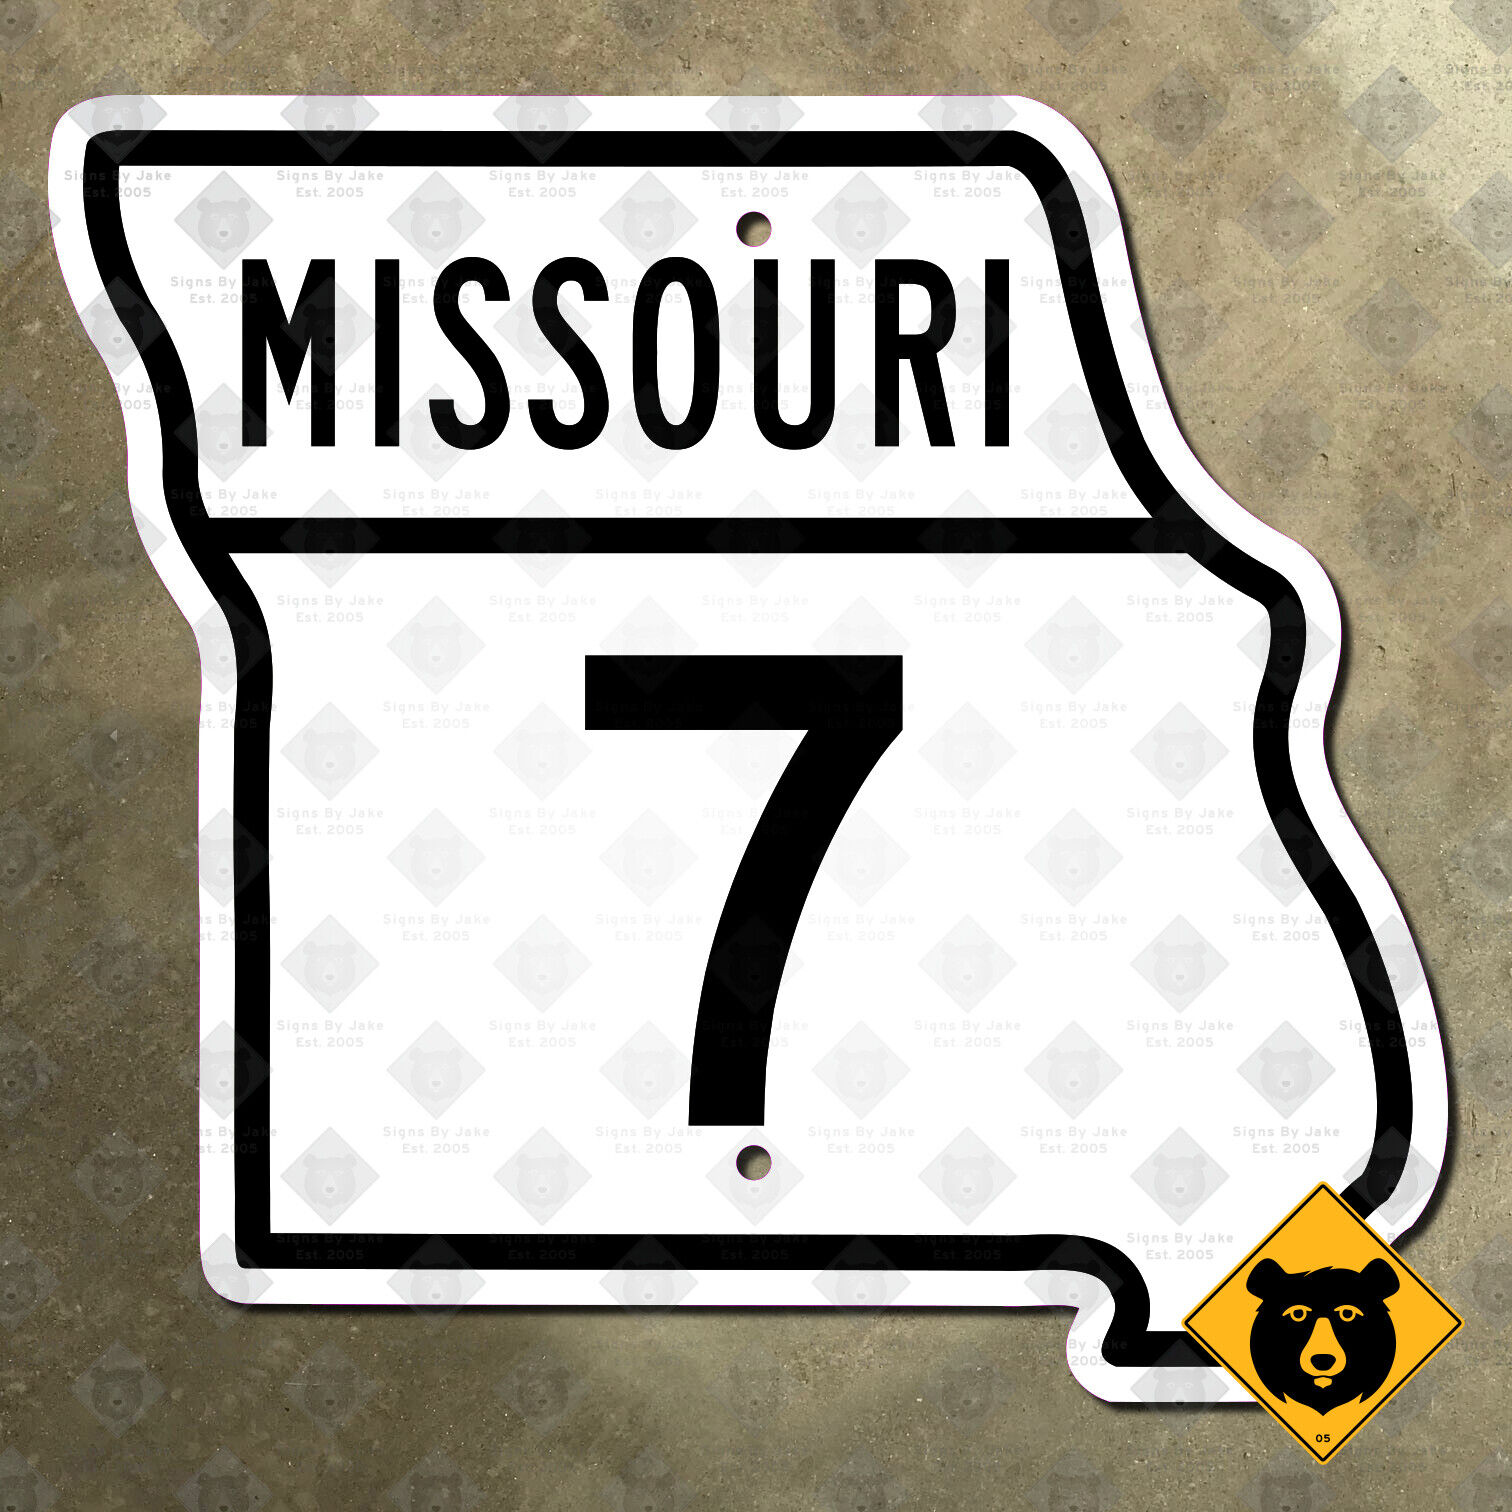 Missouri state route 7 highway road sign 1963 Springfield Kansas City map 7x7